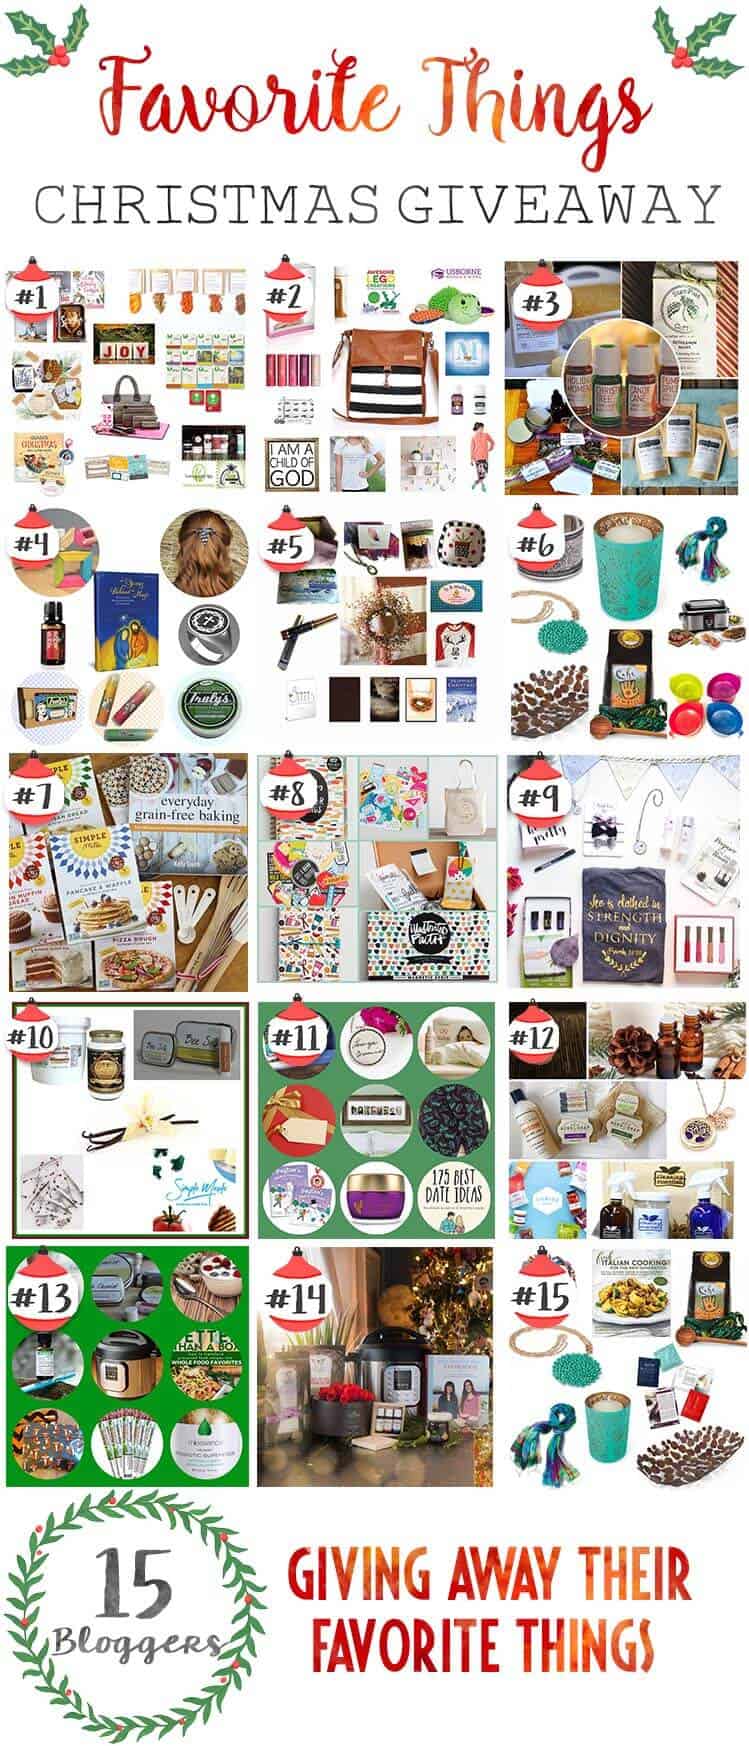 15 bloggers are giving away their favorite things. Enter to win these amazing gifts perfect for giving away or keeping to enjoy yourself.